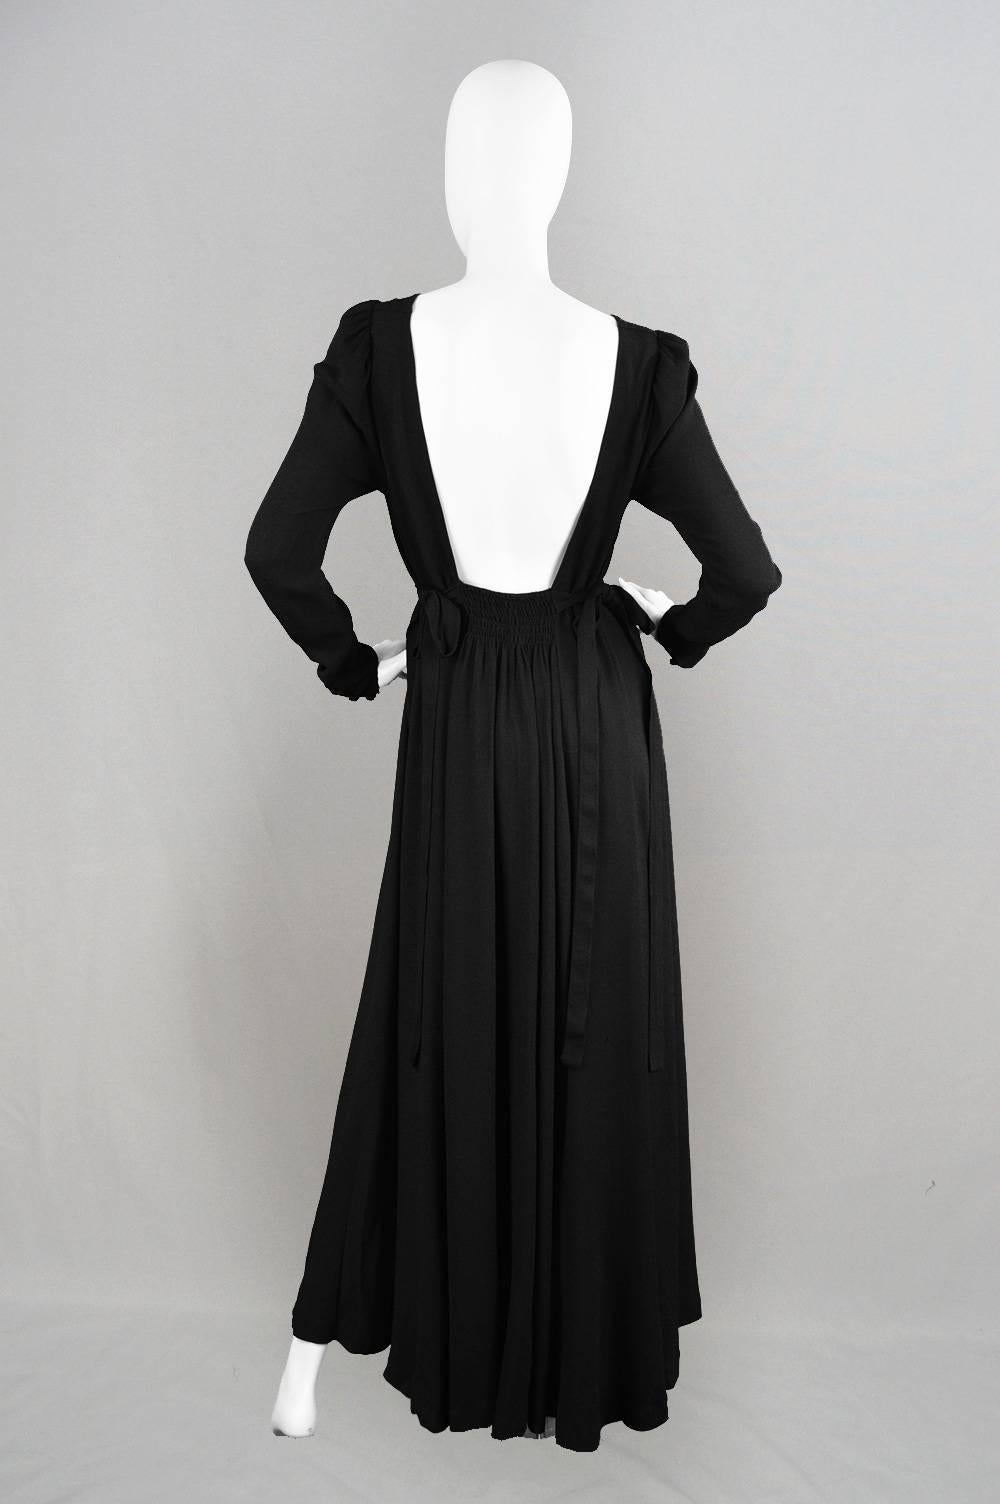 An absolutely breathtaking vintage Ossie Clark dress with the 'couture' Quorum label, from the 1970s. In his signature black moss crepe, which gives amazing drape and fluidity, this is an incredibly rare and collectible Ossie Clark piece and would